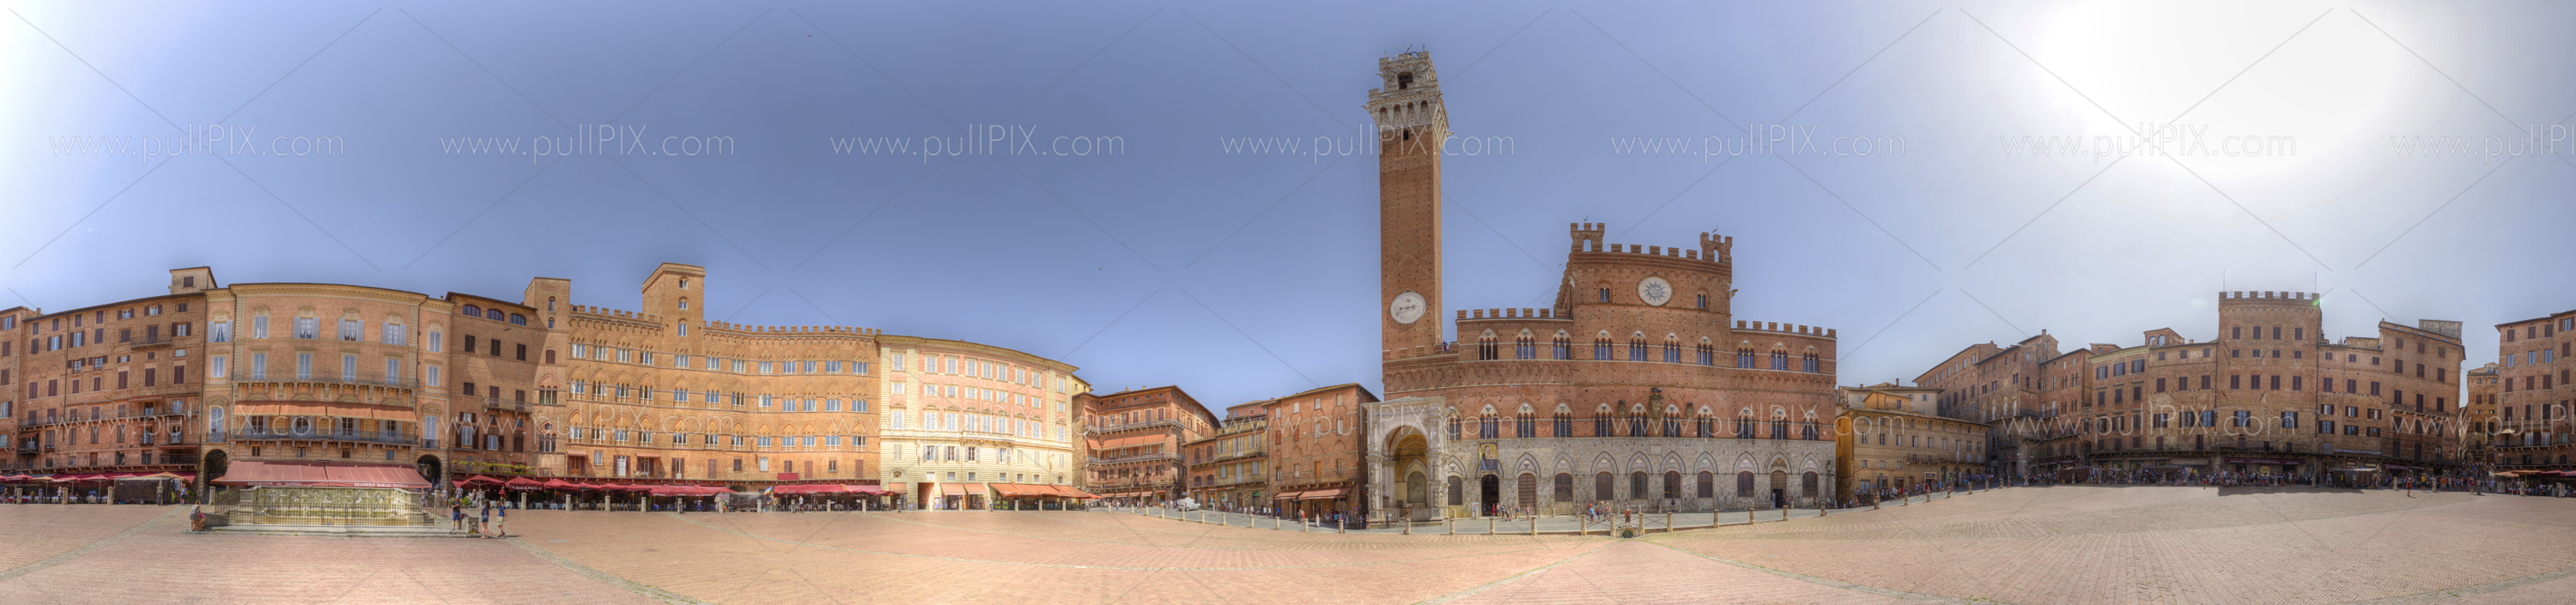 Preview Siena Piazza del campo_HDR.jpg